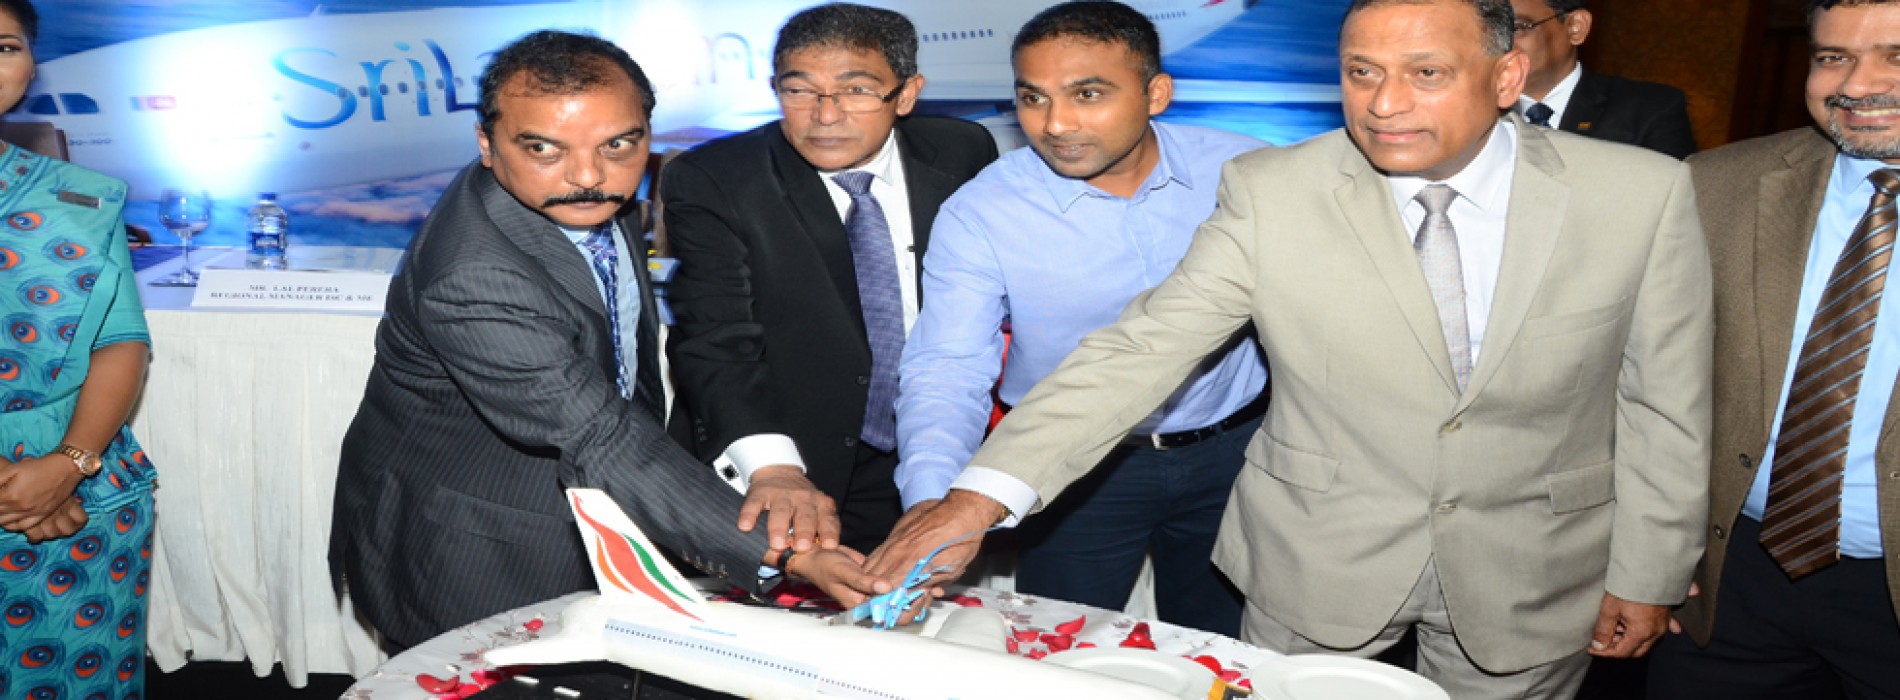 SriLankan Airlines connects Visakhapatnam, Hyderabad and Coimbatore to the world